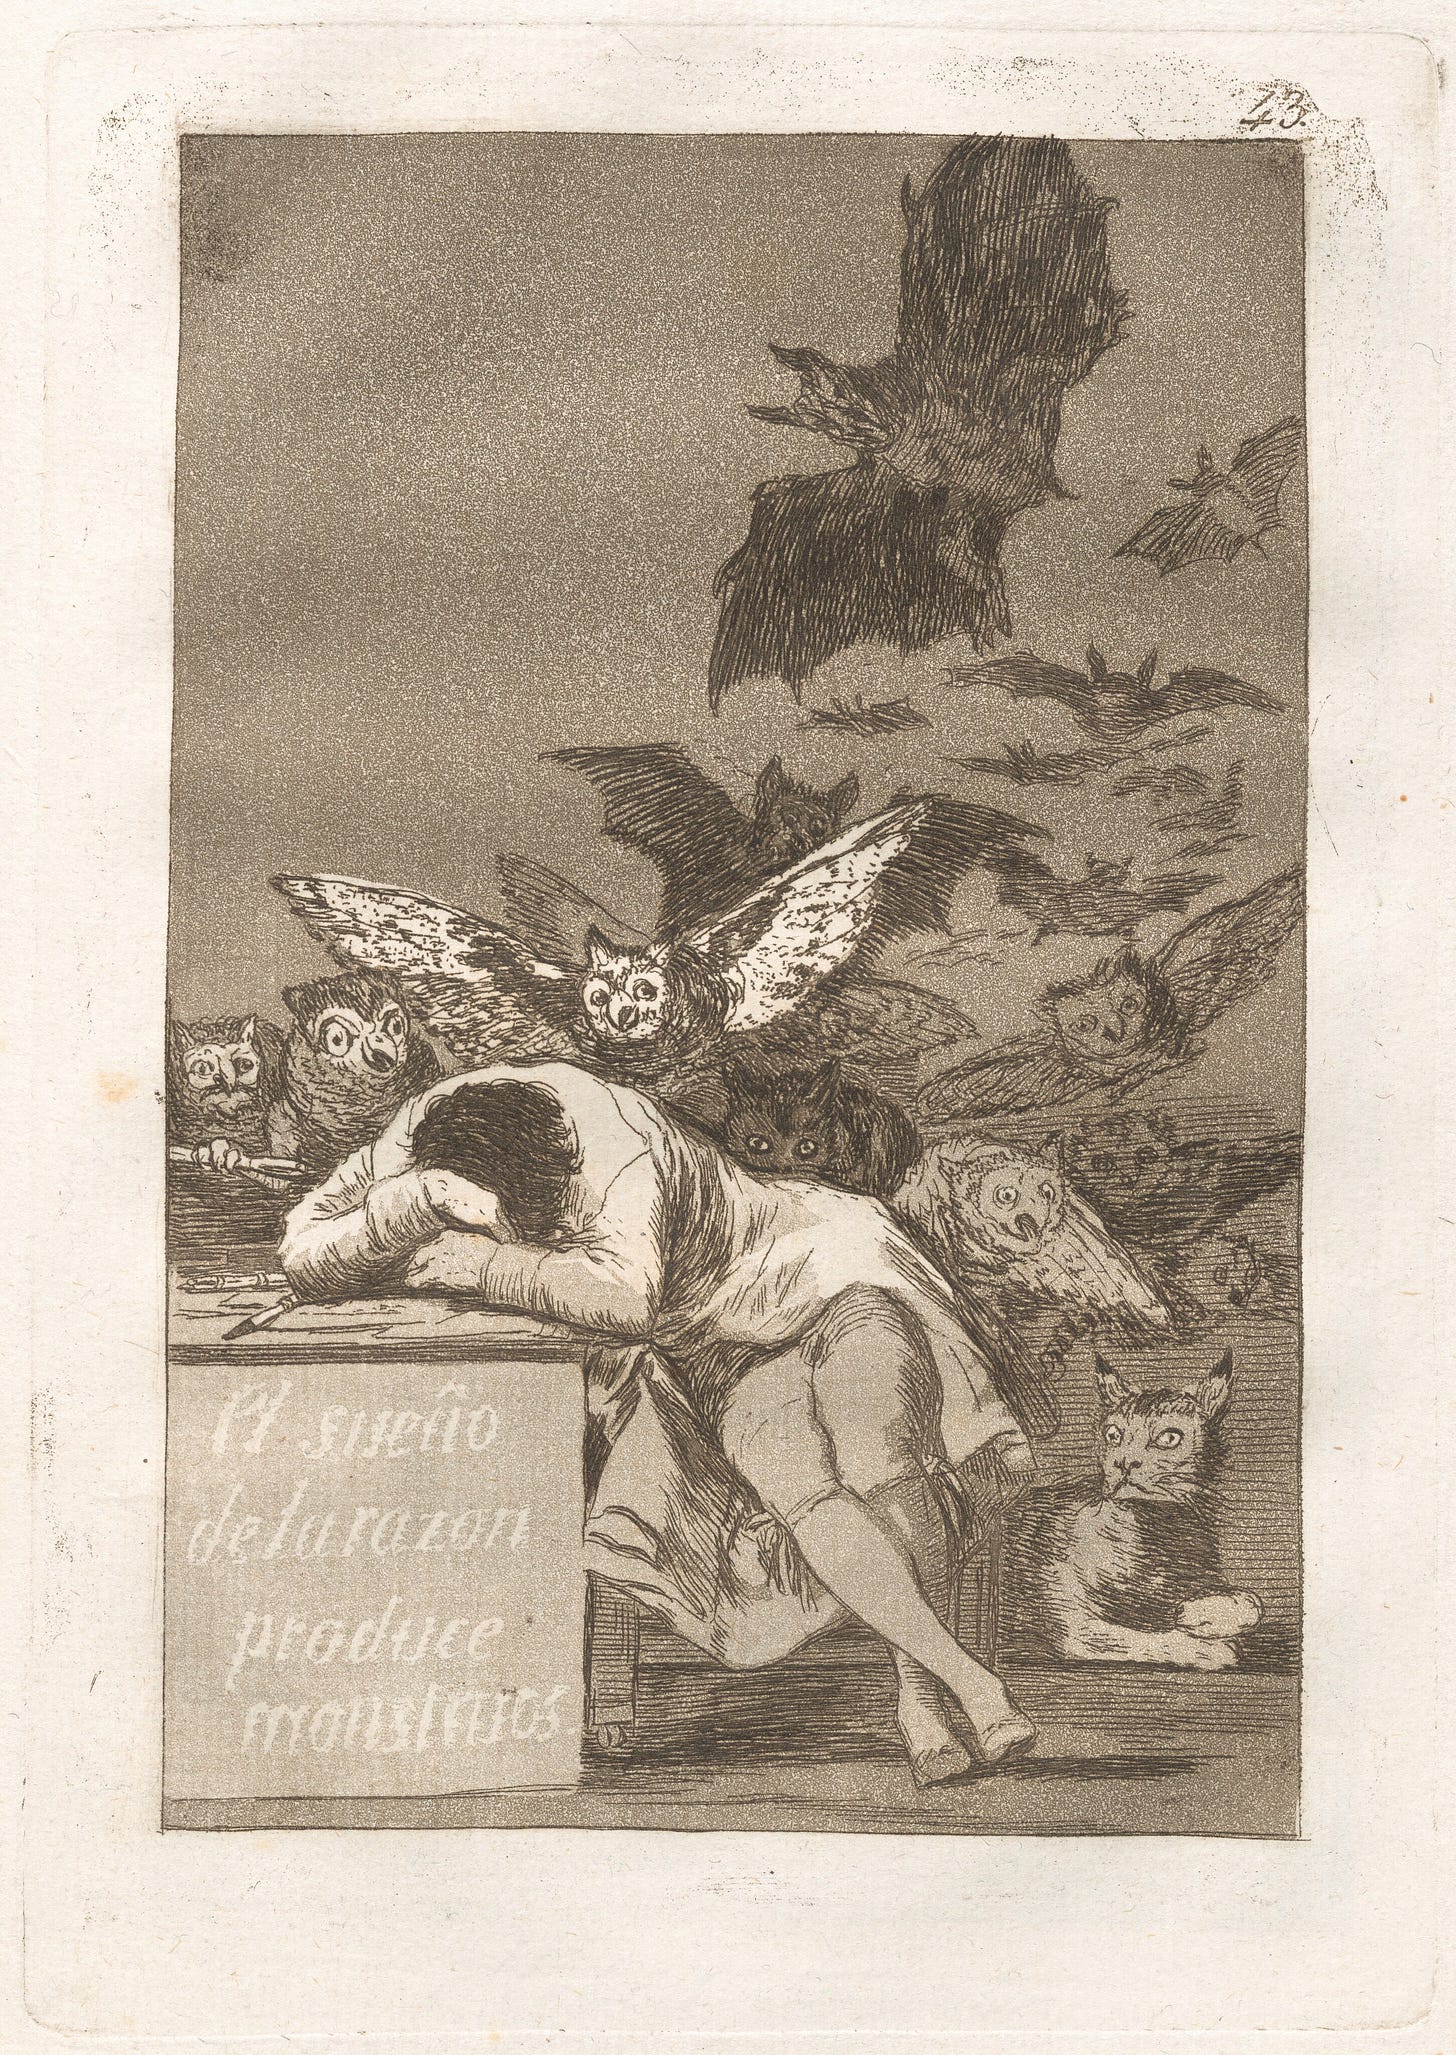 A man sits, his head on his arms against a table which says 'el sueño de la razón produce monstruos'. Above him are frightening winged night creatures and owls diving at him. Behind him sits a big wild cat. It is a sketch.